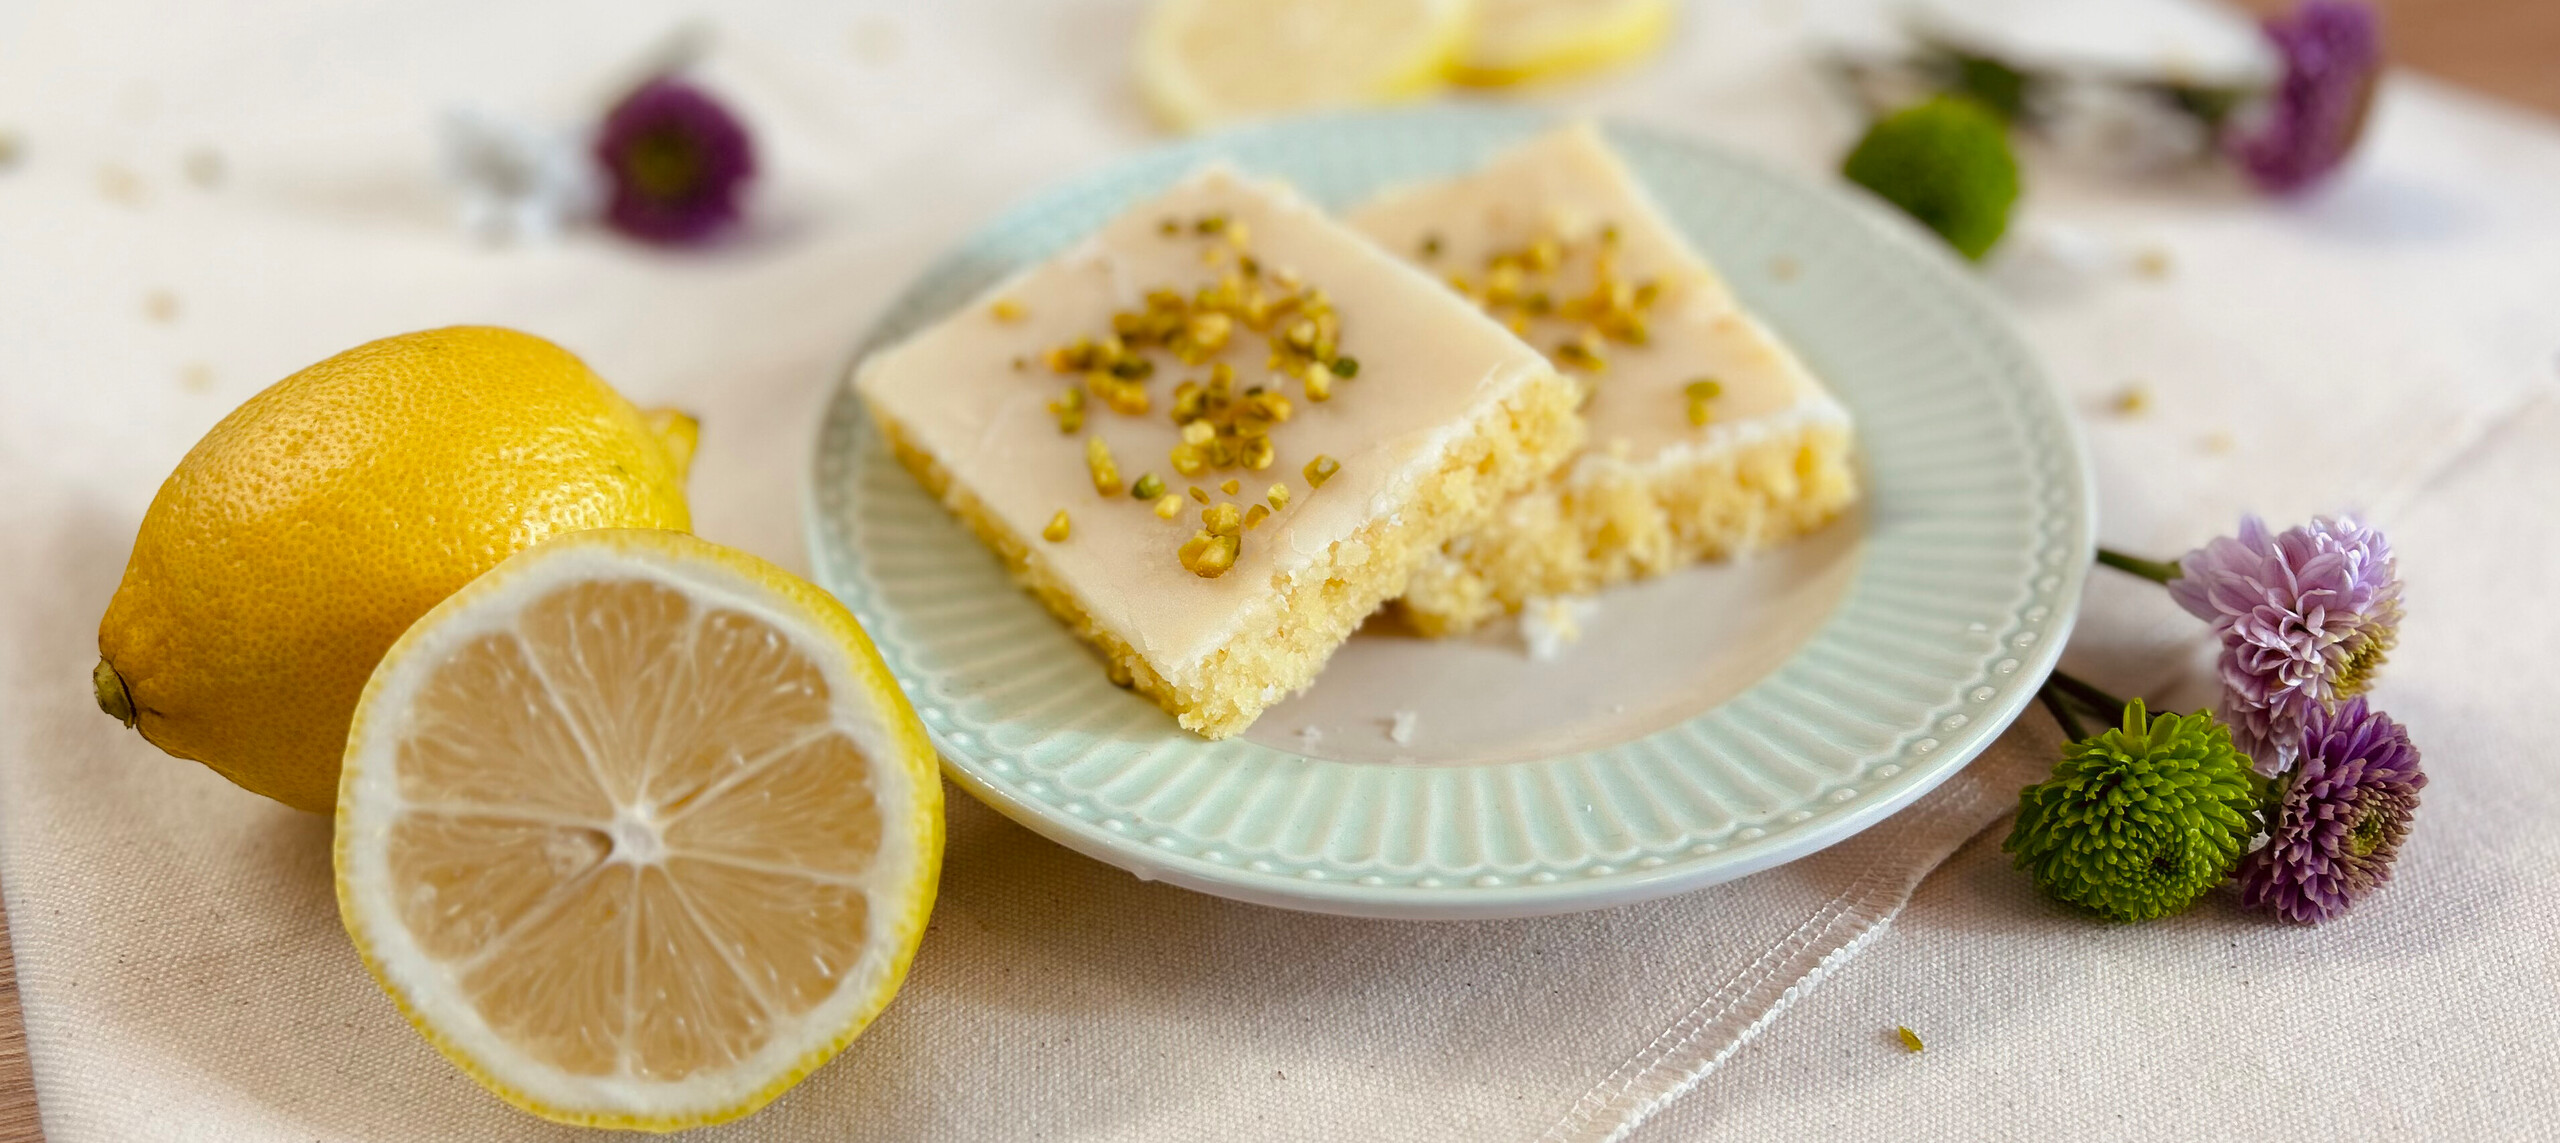 Picture of Spelt lemon cake on a plate with lemons next to it